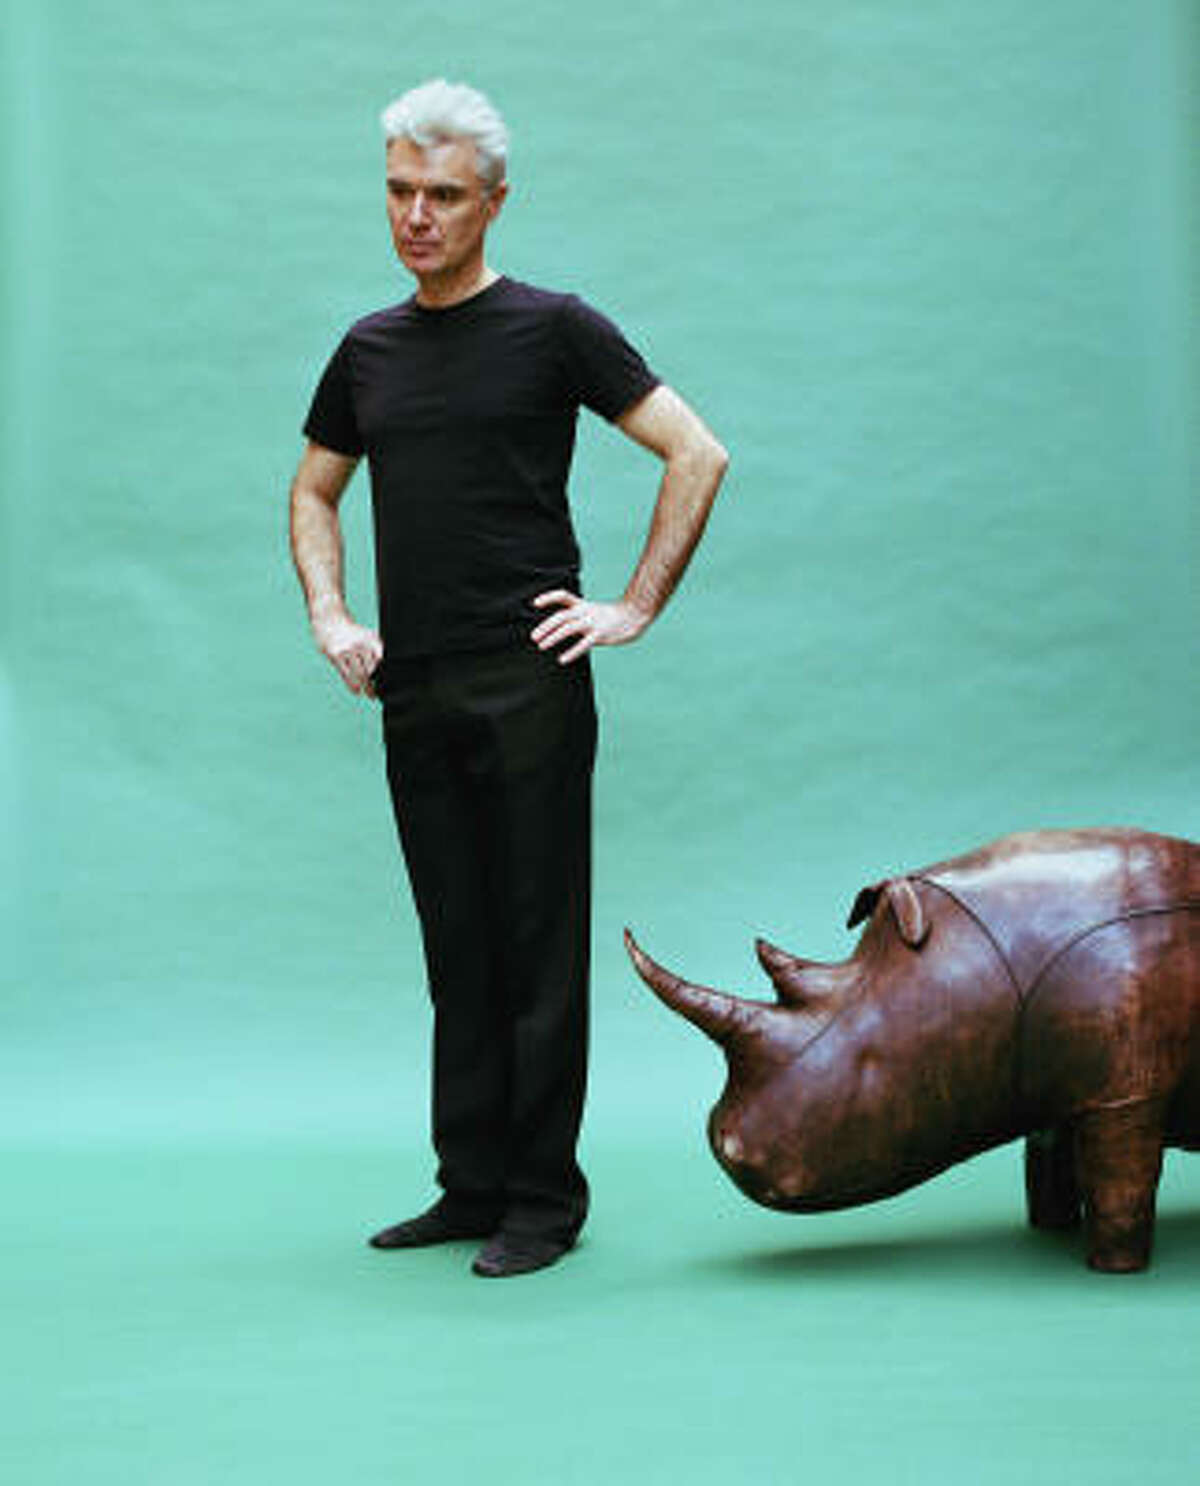 David Byrne has chosen a route more intriguing than had he continued with Talking Heads after Naked, an album whose title suggested things had reached a point of vulnerability or embarrassment.